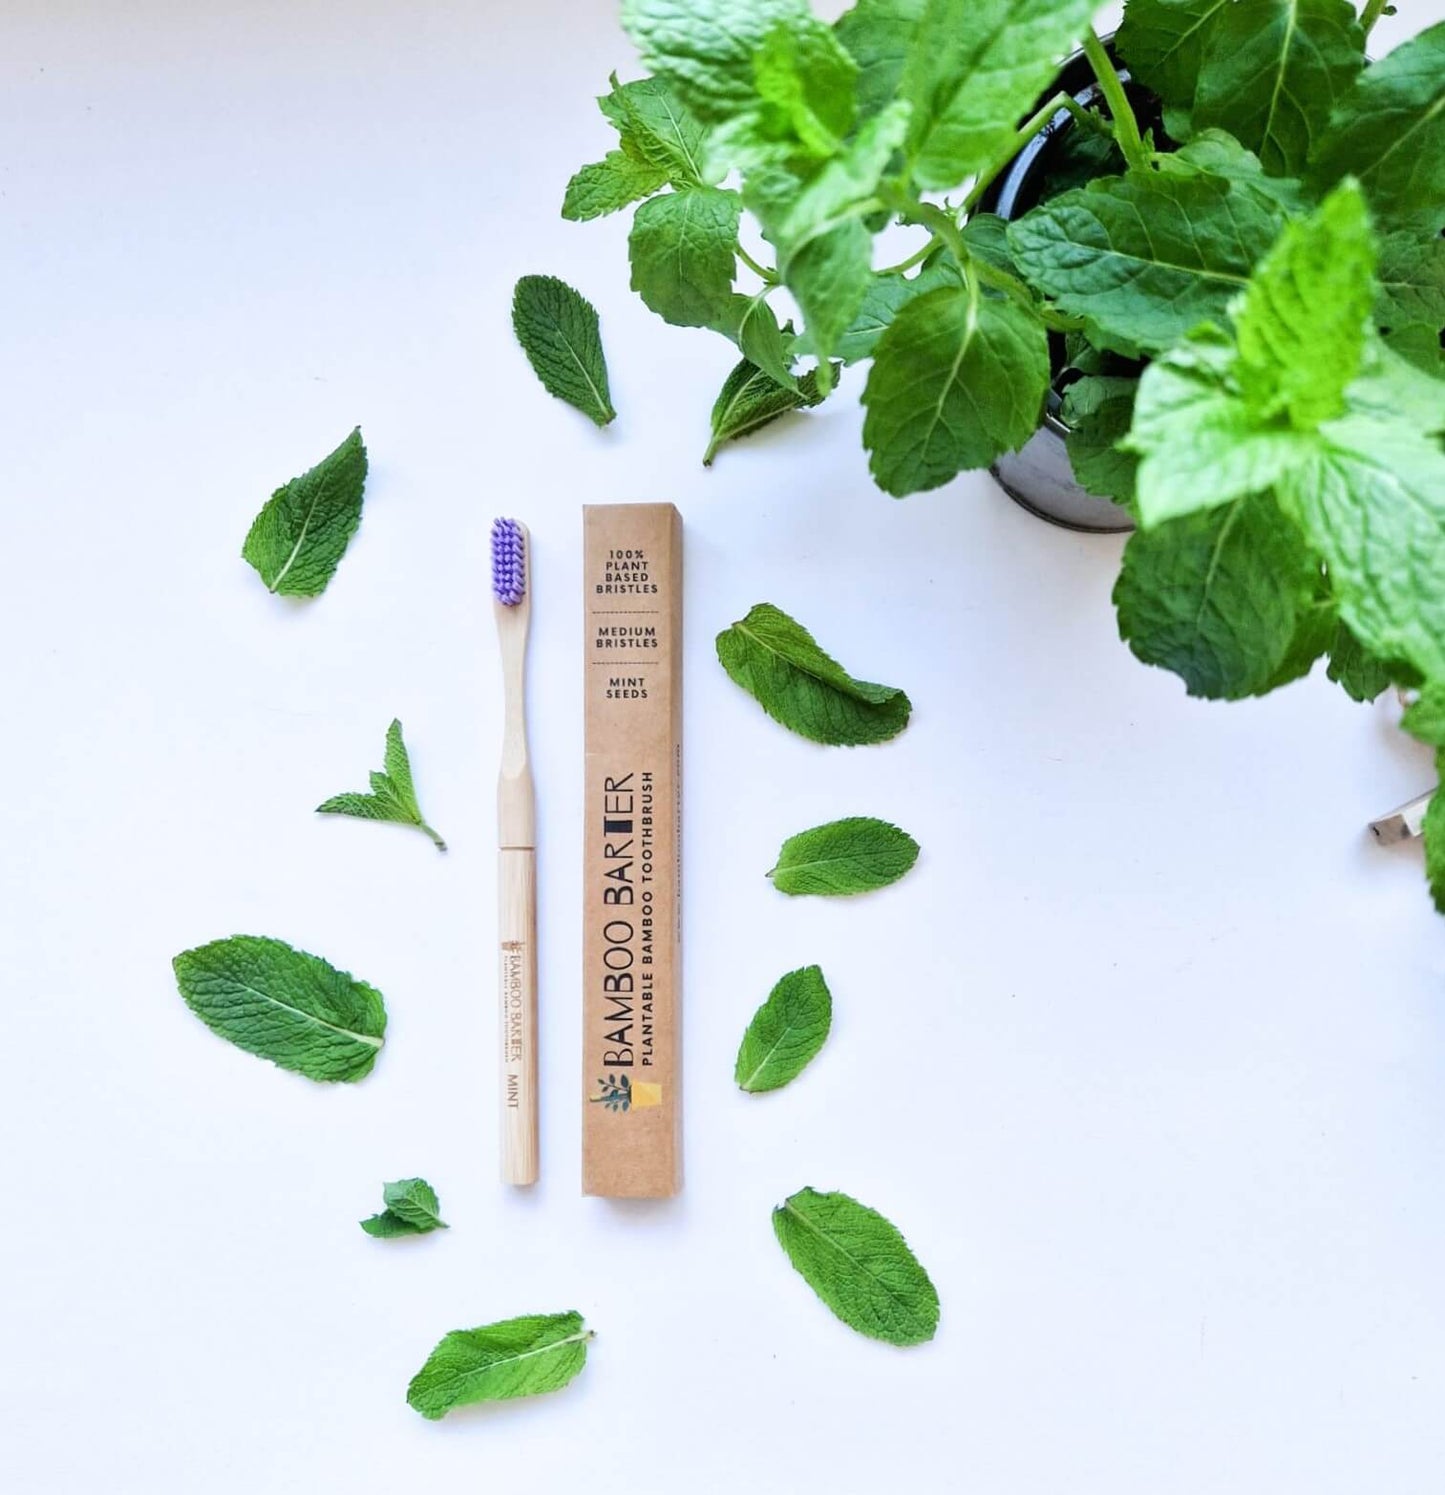 A purple bristle bamboo toothbrush next to its packaging and a mint plant.